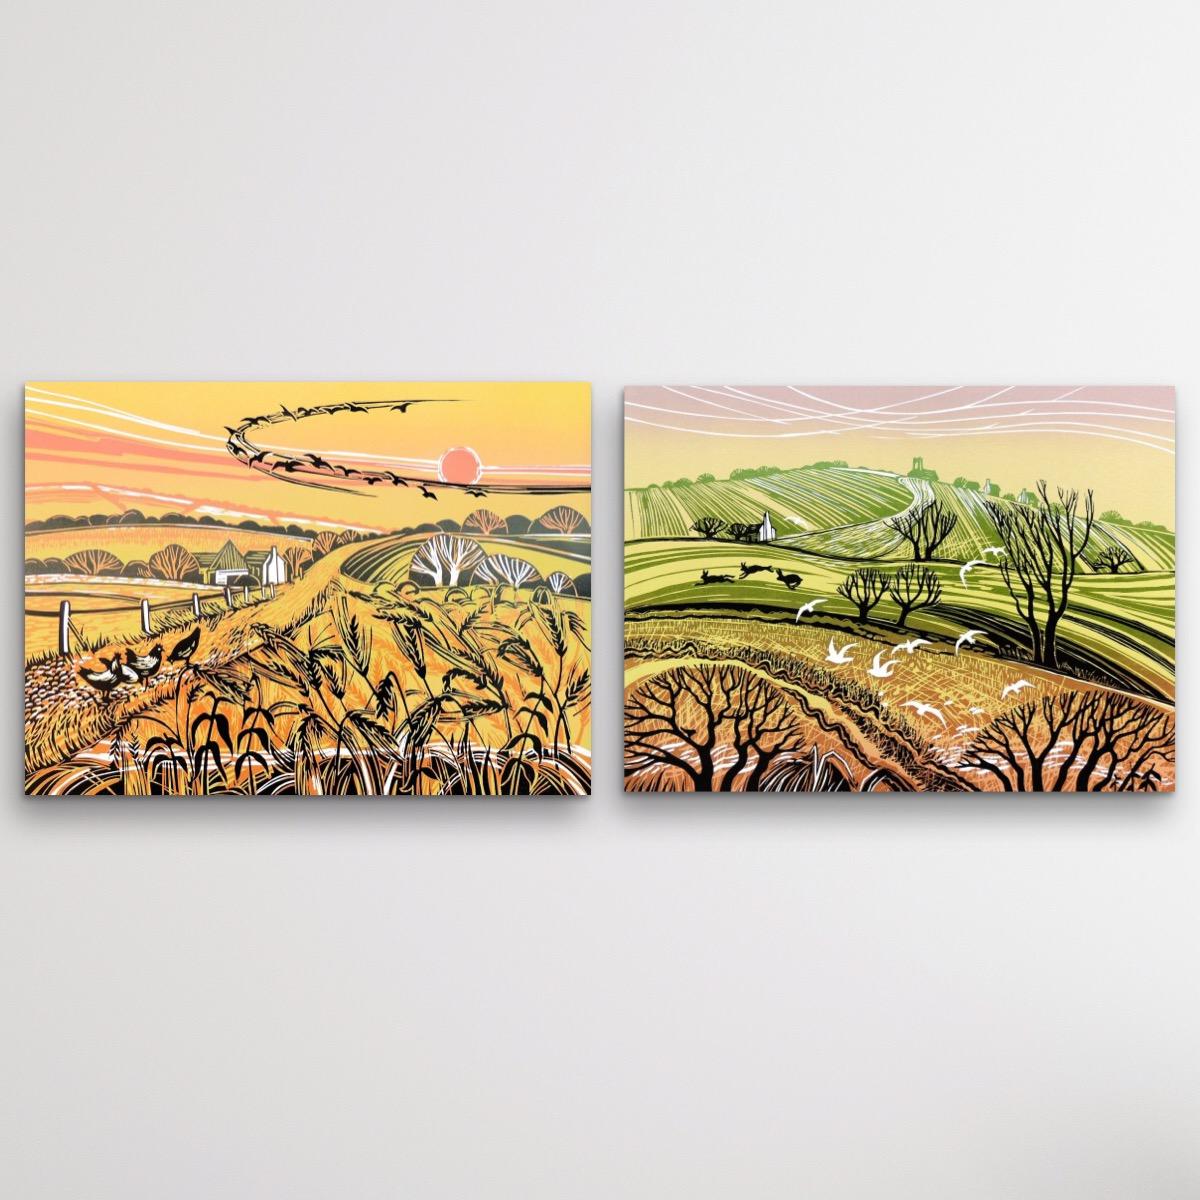 Rob Barnes Landscape Print - Harvest Fields and Hill Flight, Diptych, 2 landscape prints, Limited edition